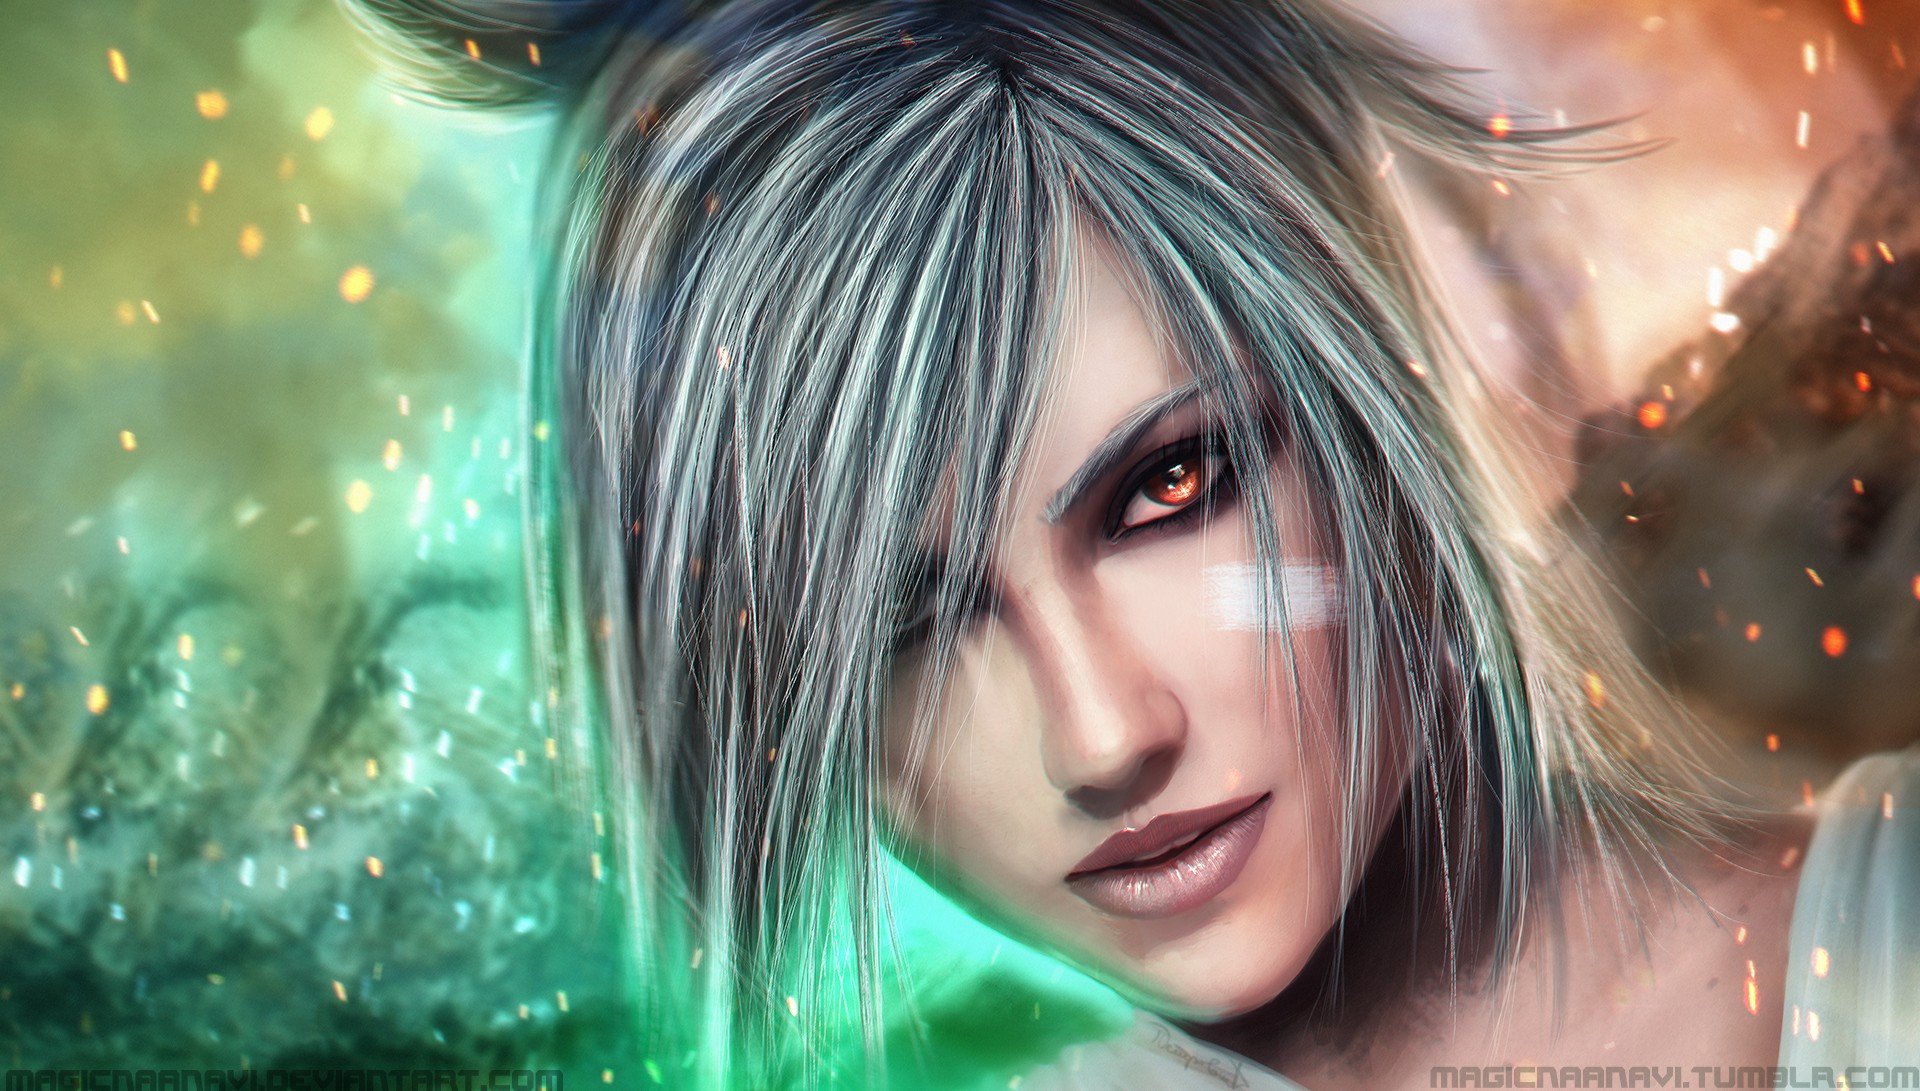 anime, Realistic, Render, Silver hair, Red eyes, Riven, League of Legends, MagicnaAnavi, Hair in face Wallpaper